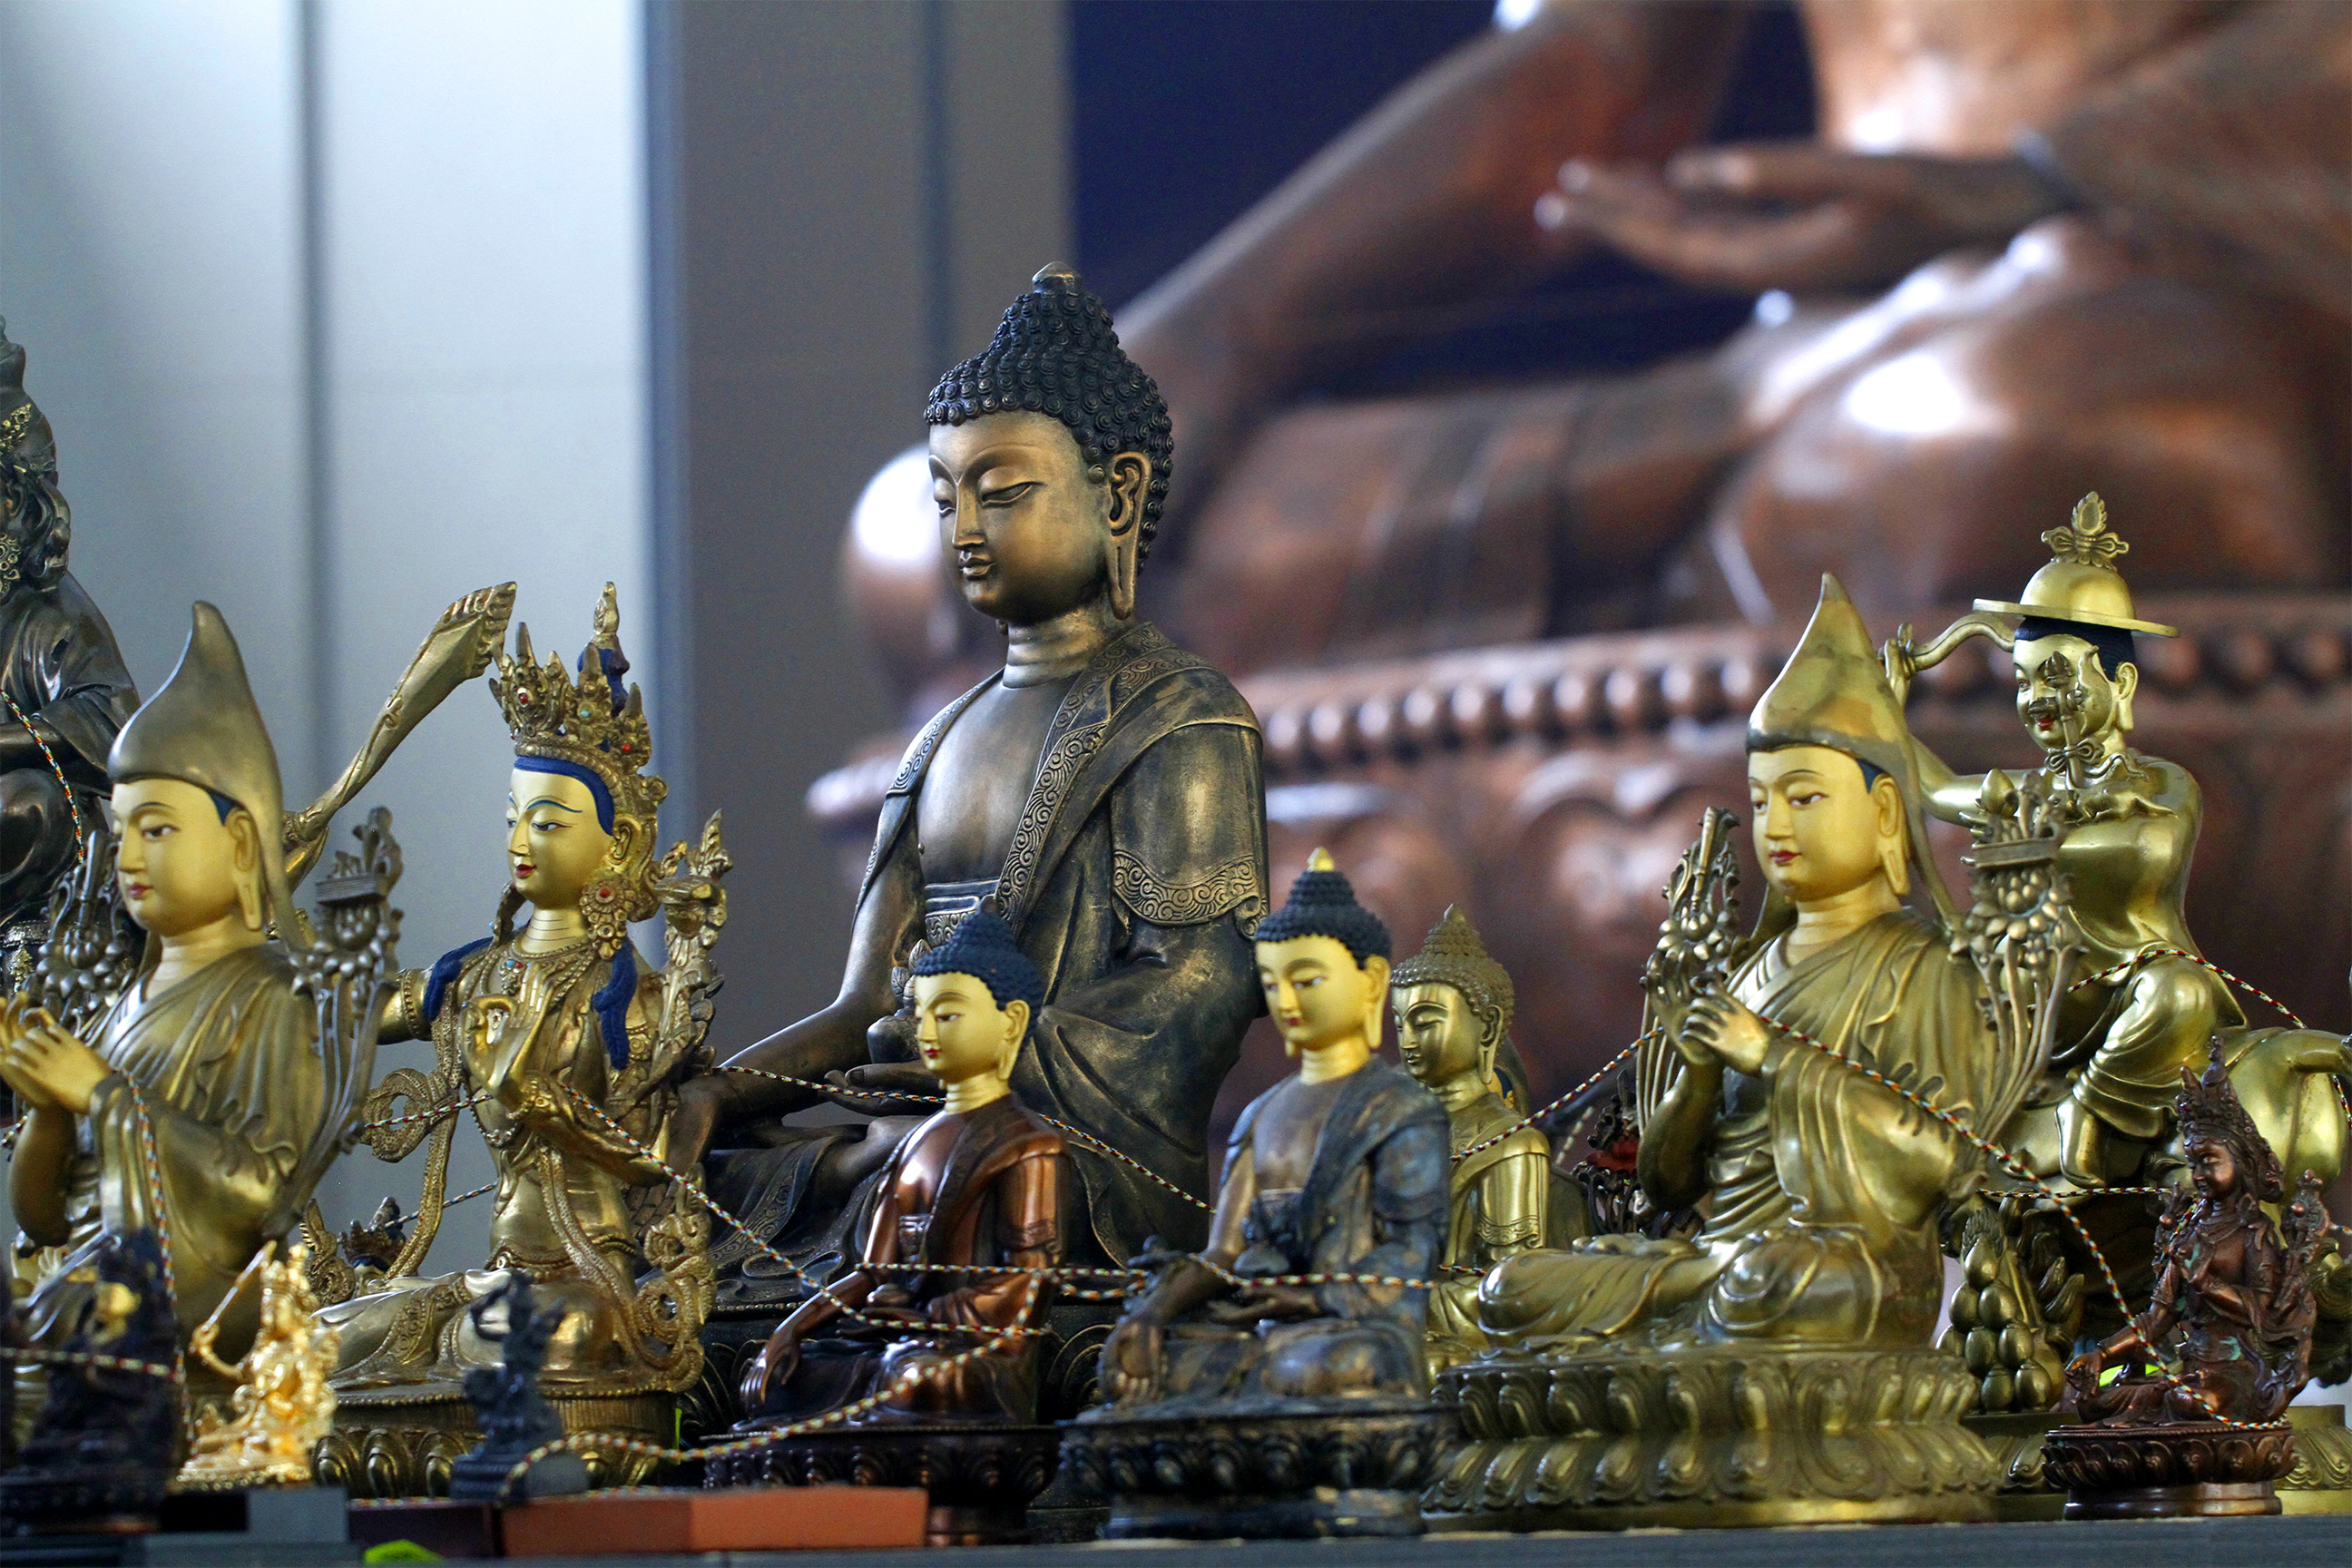 You are encouraged to bring along your statues, tsa tsas, pendants or other representations of the Buddhas' body for consecration during the Rabney puja